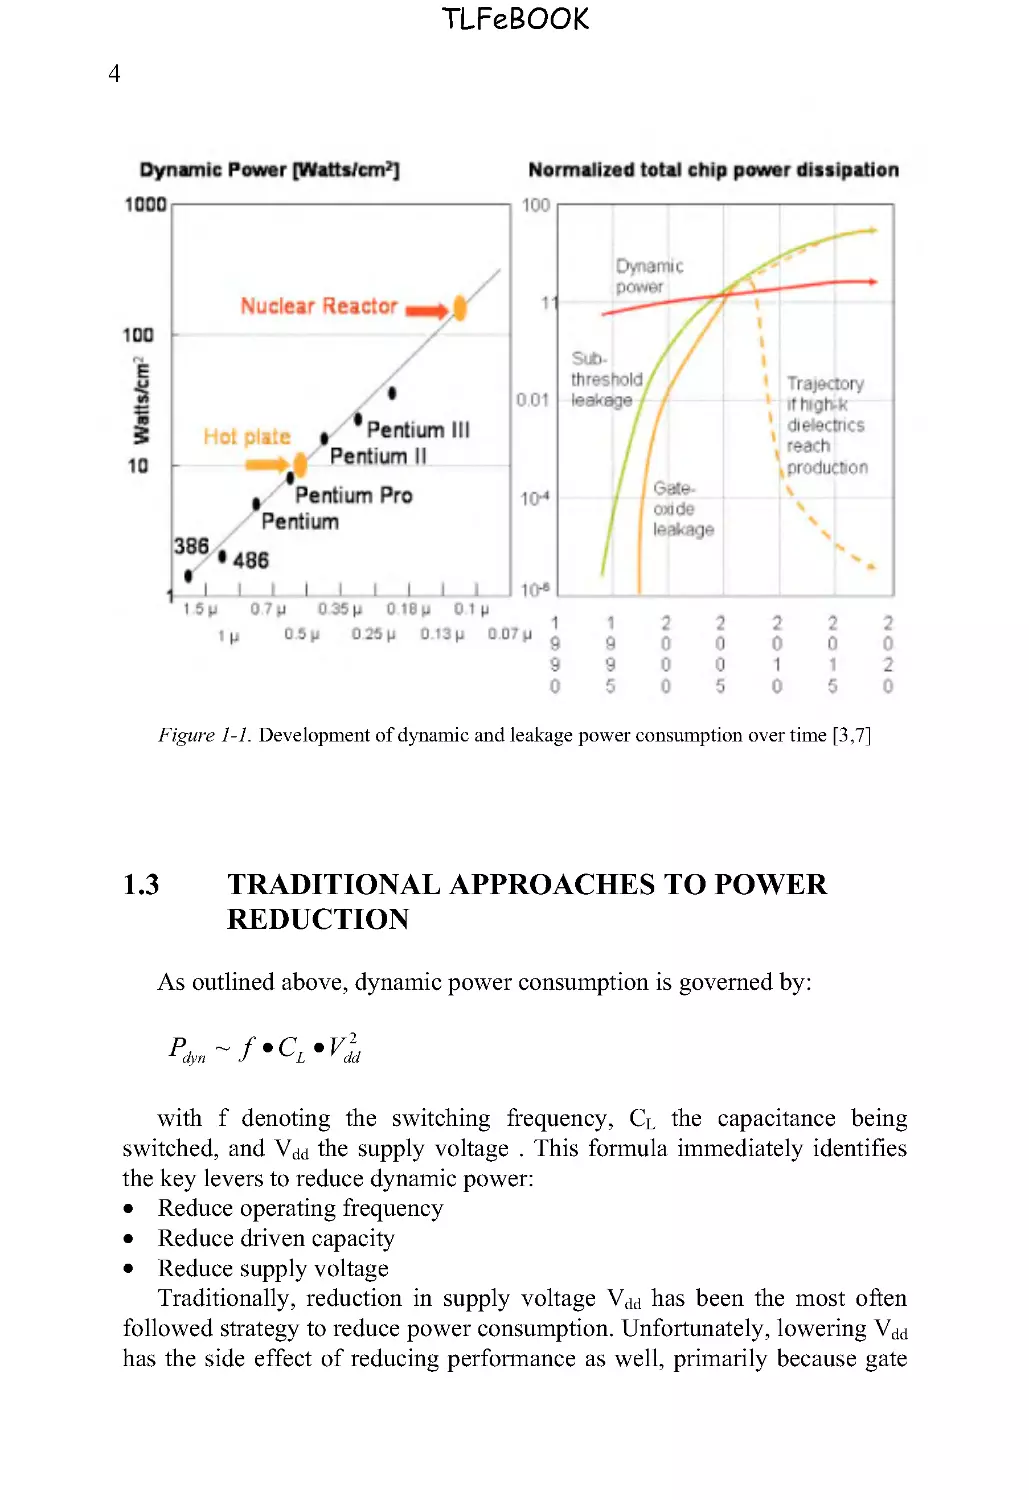 1.3 TRADITIONAL APPROACHES TO POWER REDUCTION